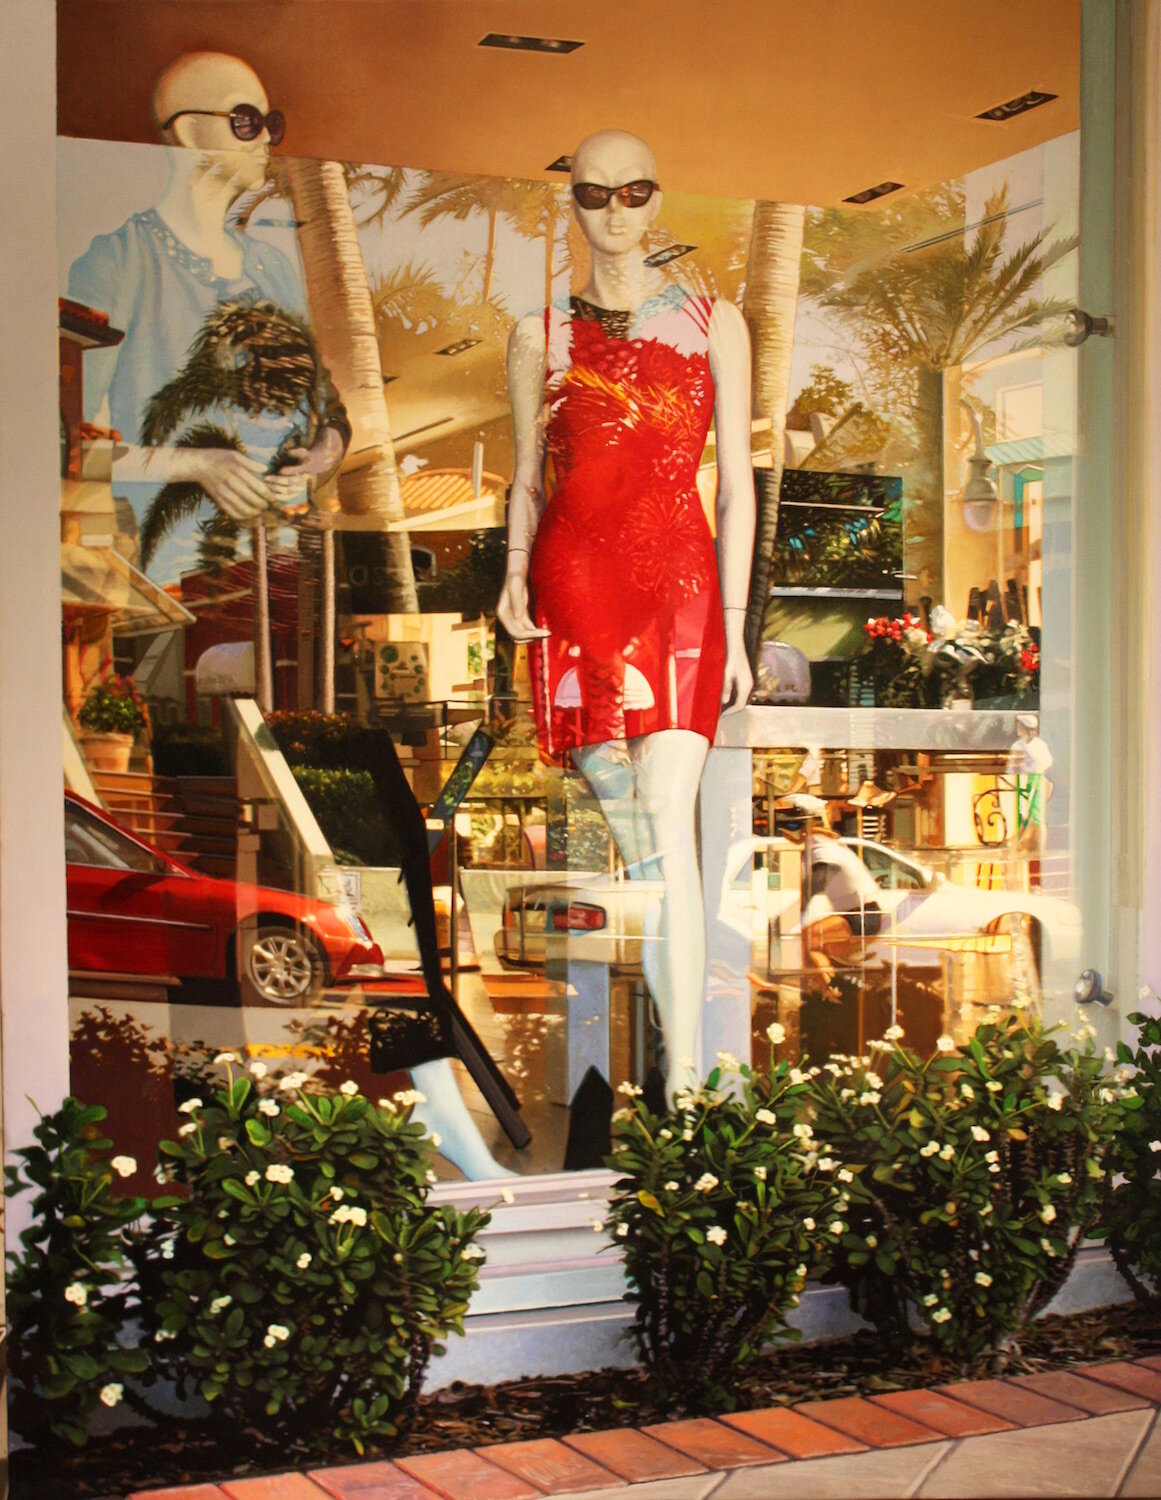 The Red Dress, Naples, Florida